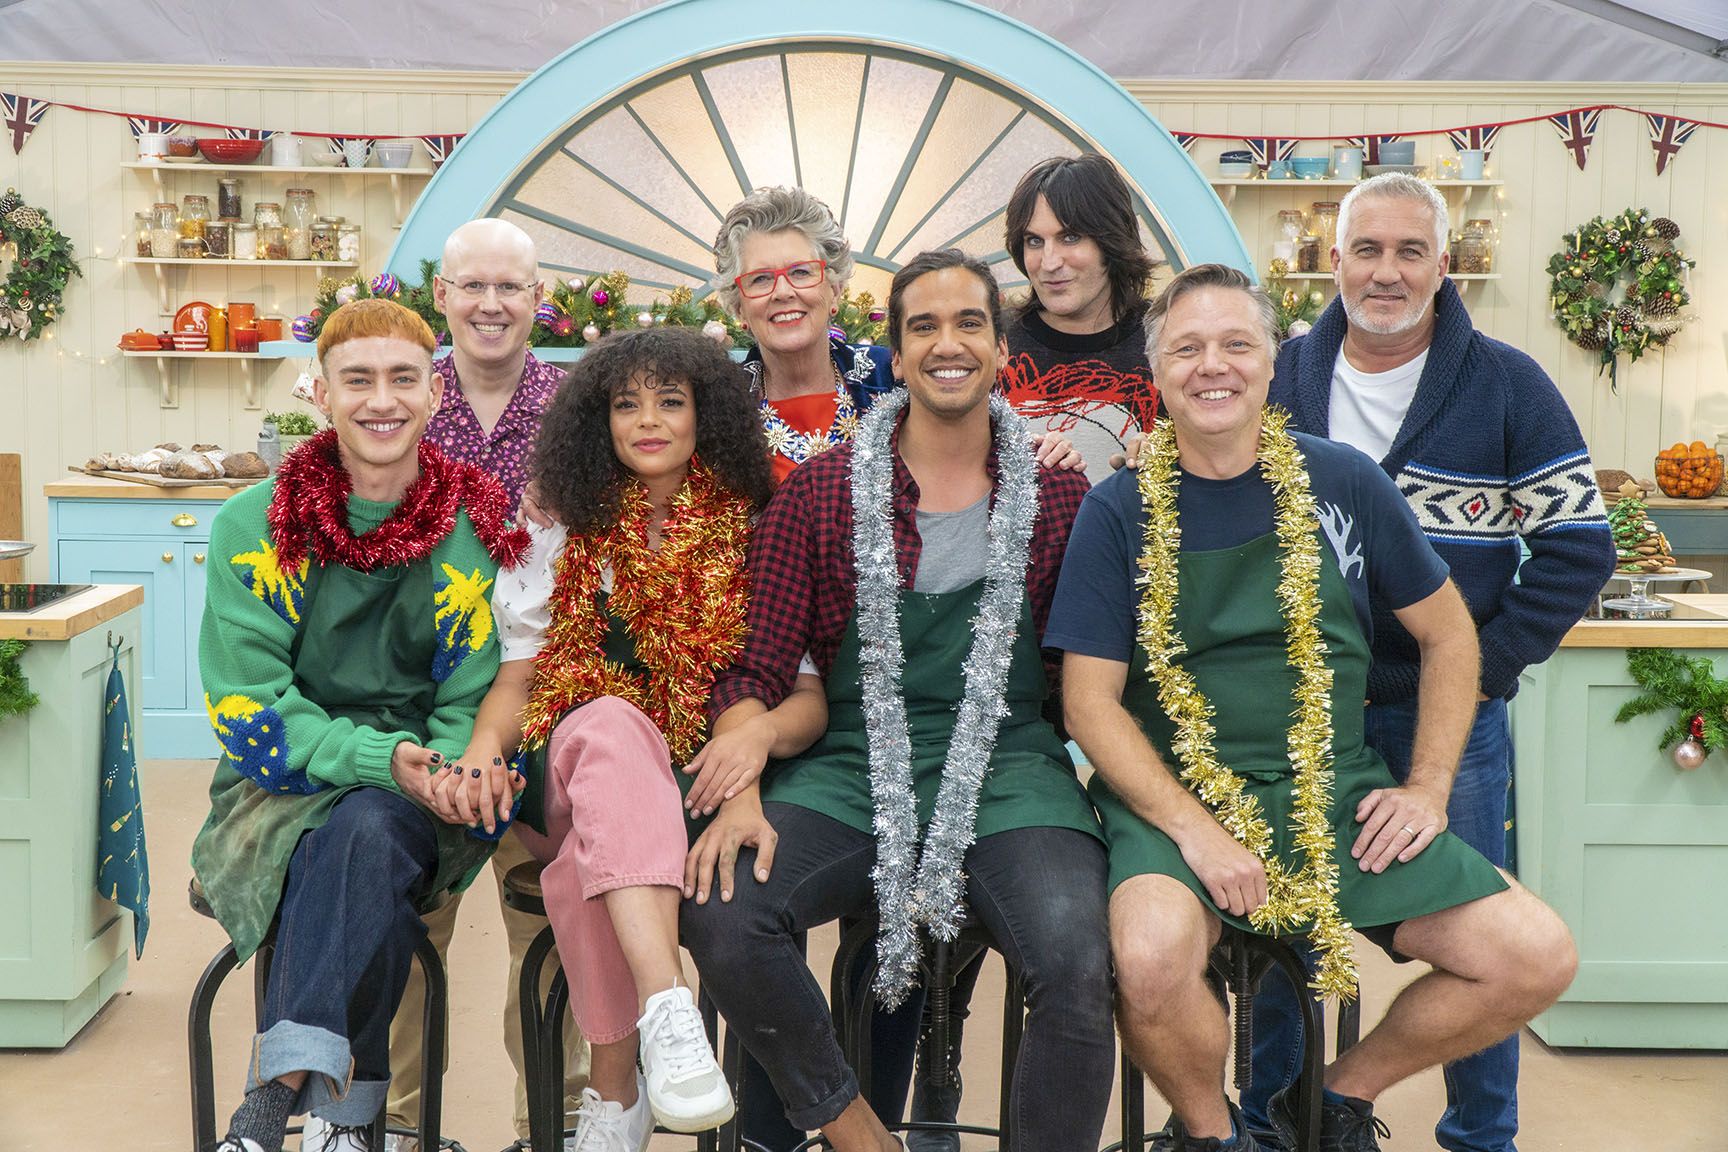 Cast of it's a sin in the bake off tent 